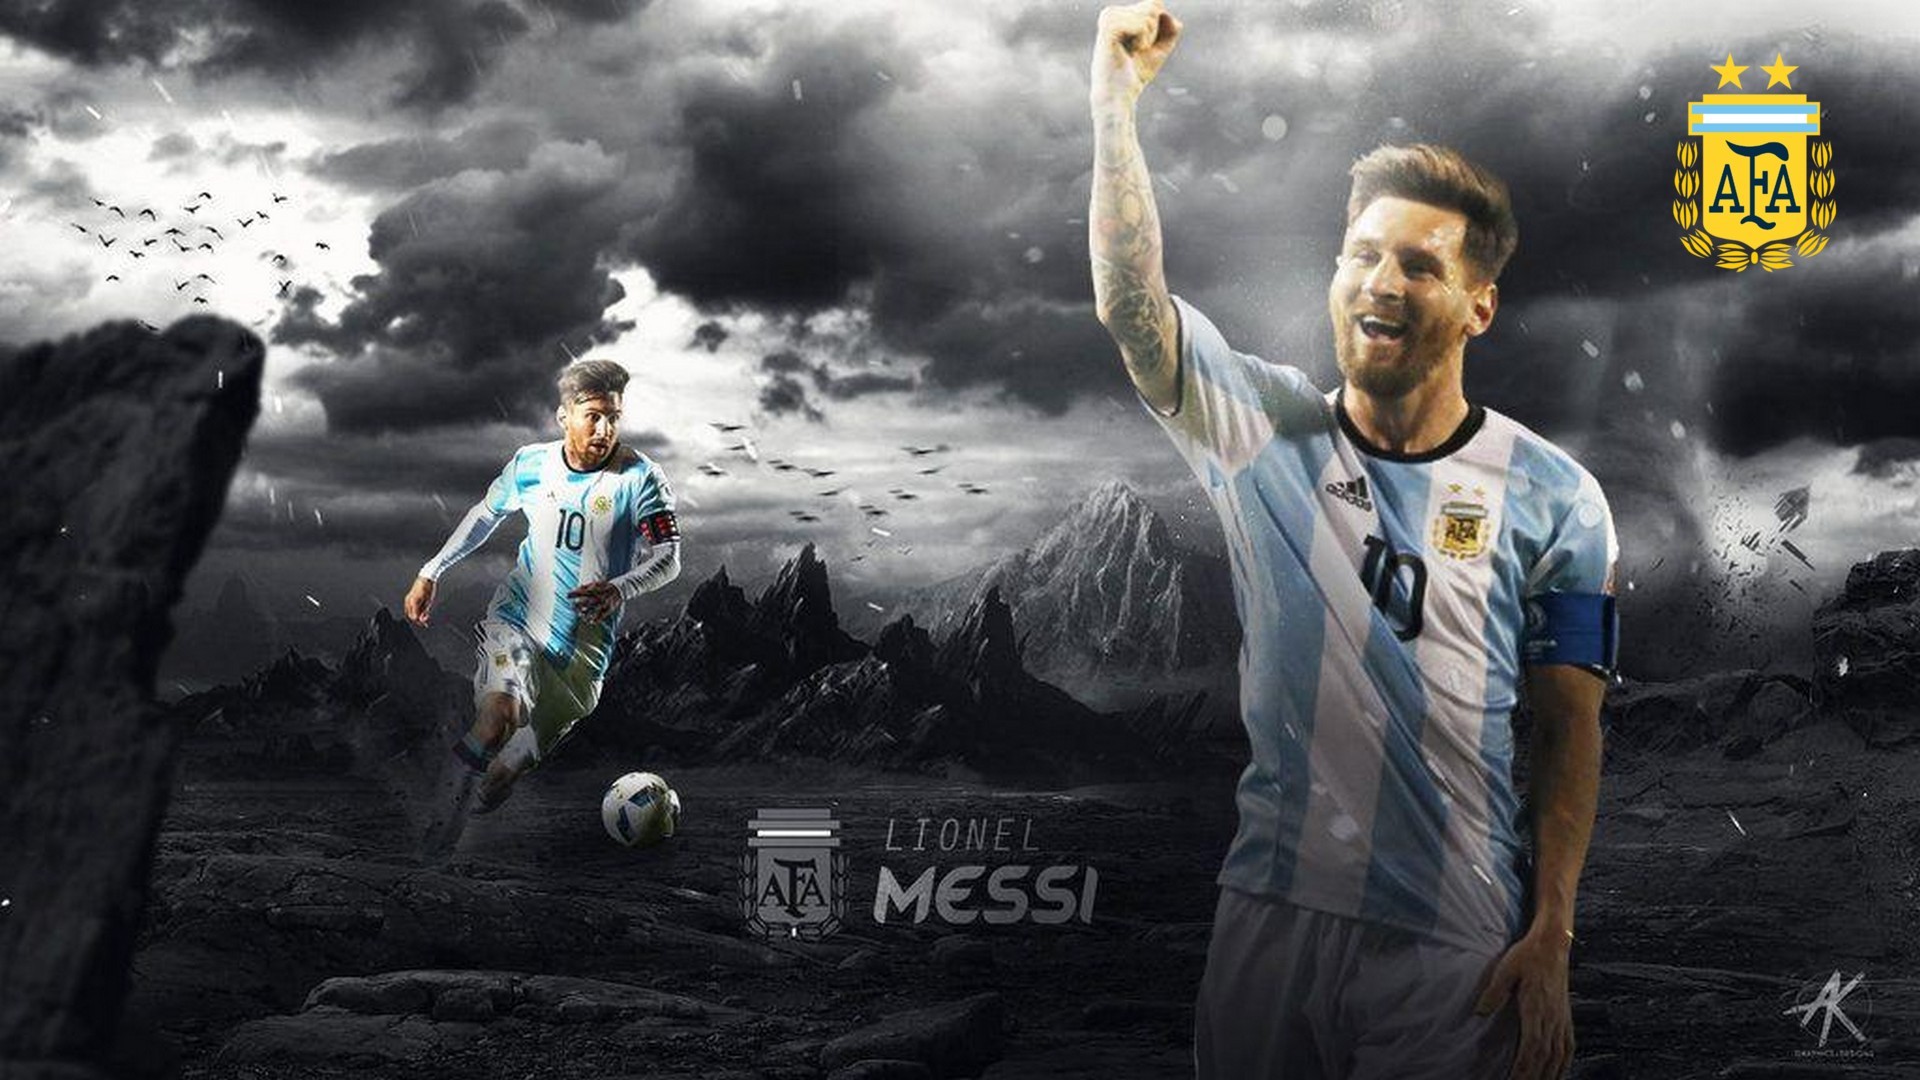 Wallpapers Hd Messi Argentina With Resolution Pixel - Lionel Messi Hd Wallpaper 2018 Argentina , HD Wallpaper & Backgrounds